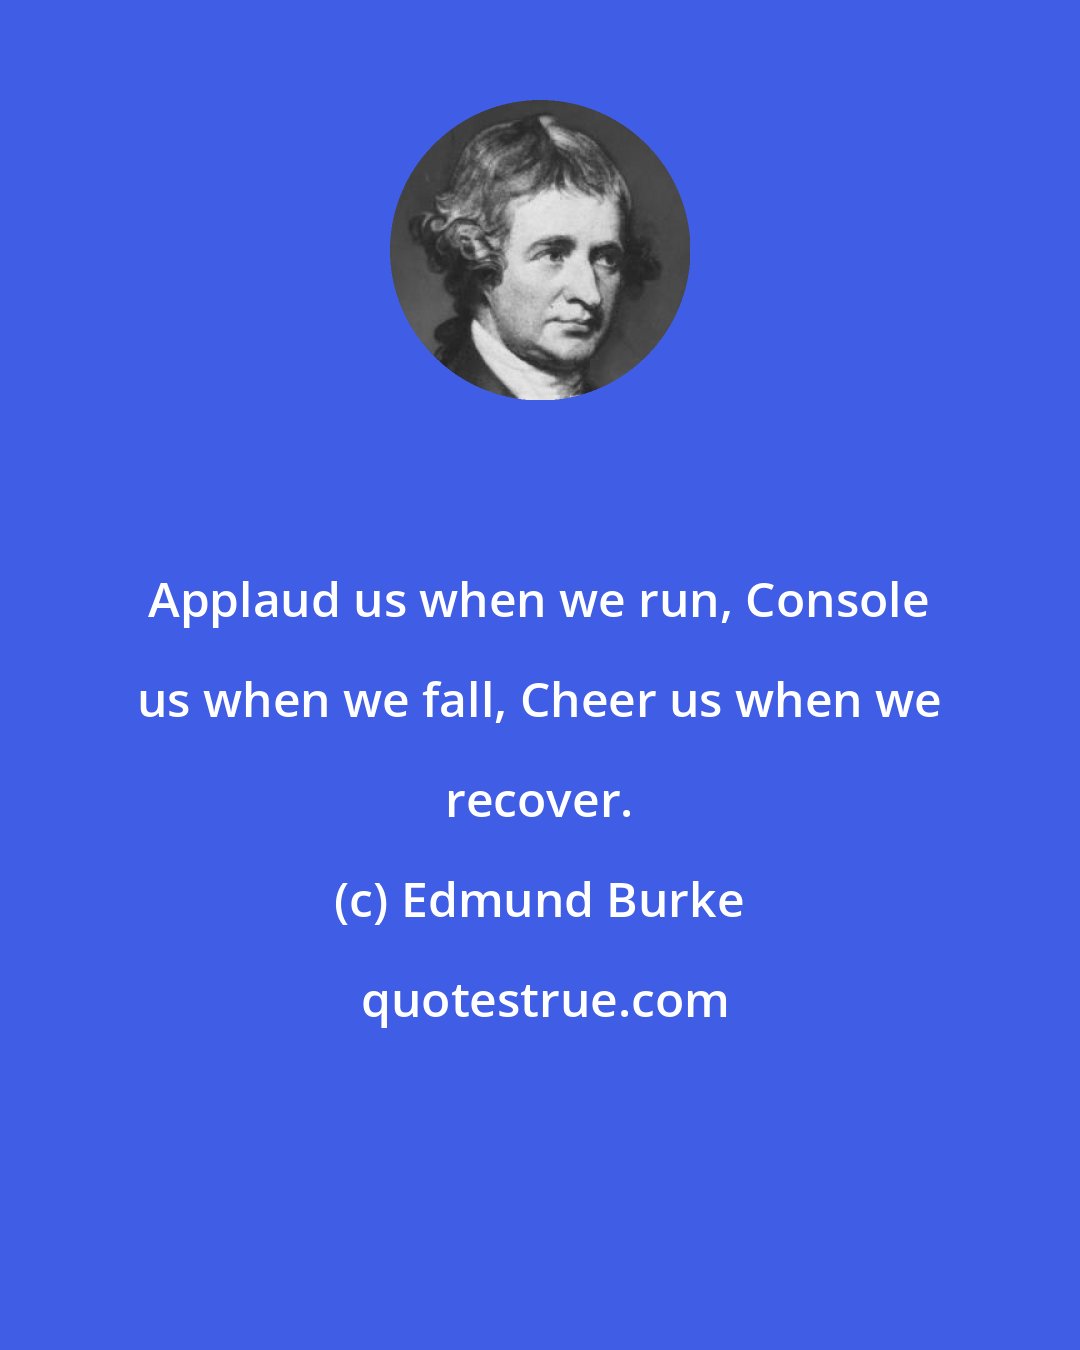 Edmund Burke: Applaud us when we run, Console us when we fall, Cheer us when we recover.